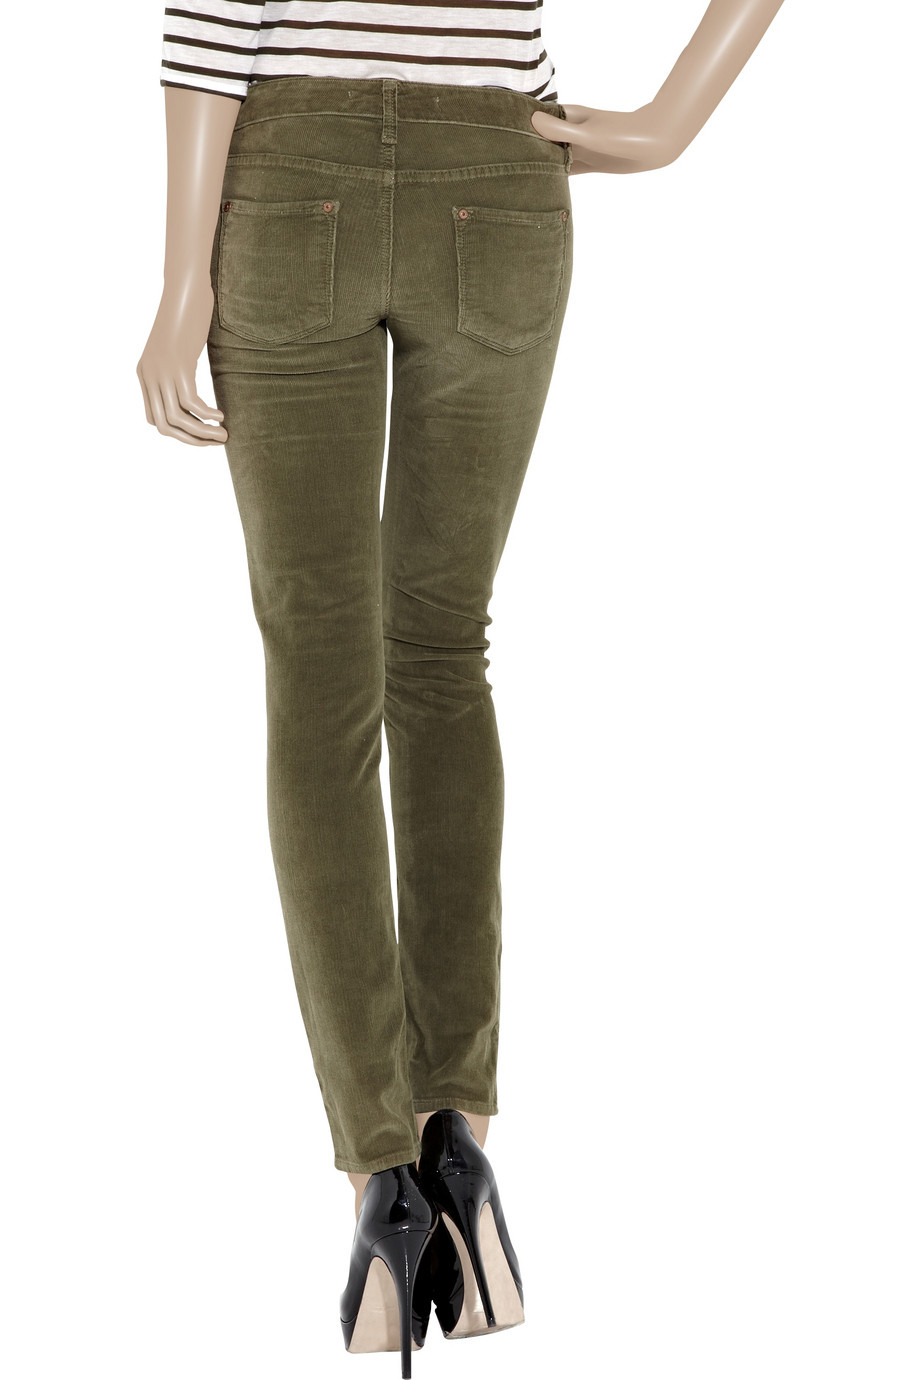 green skinny jeans with pockets for women